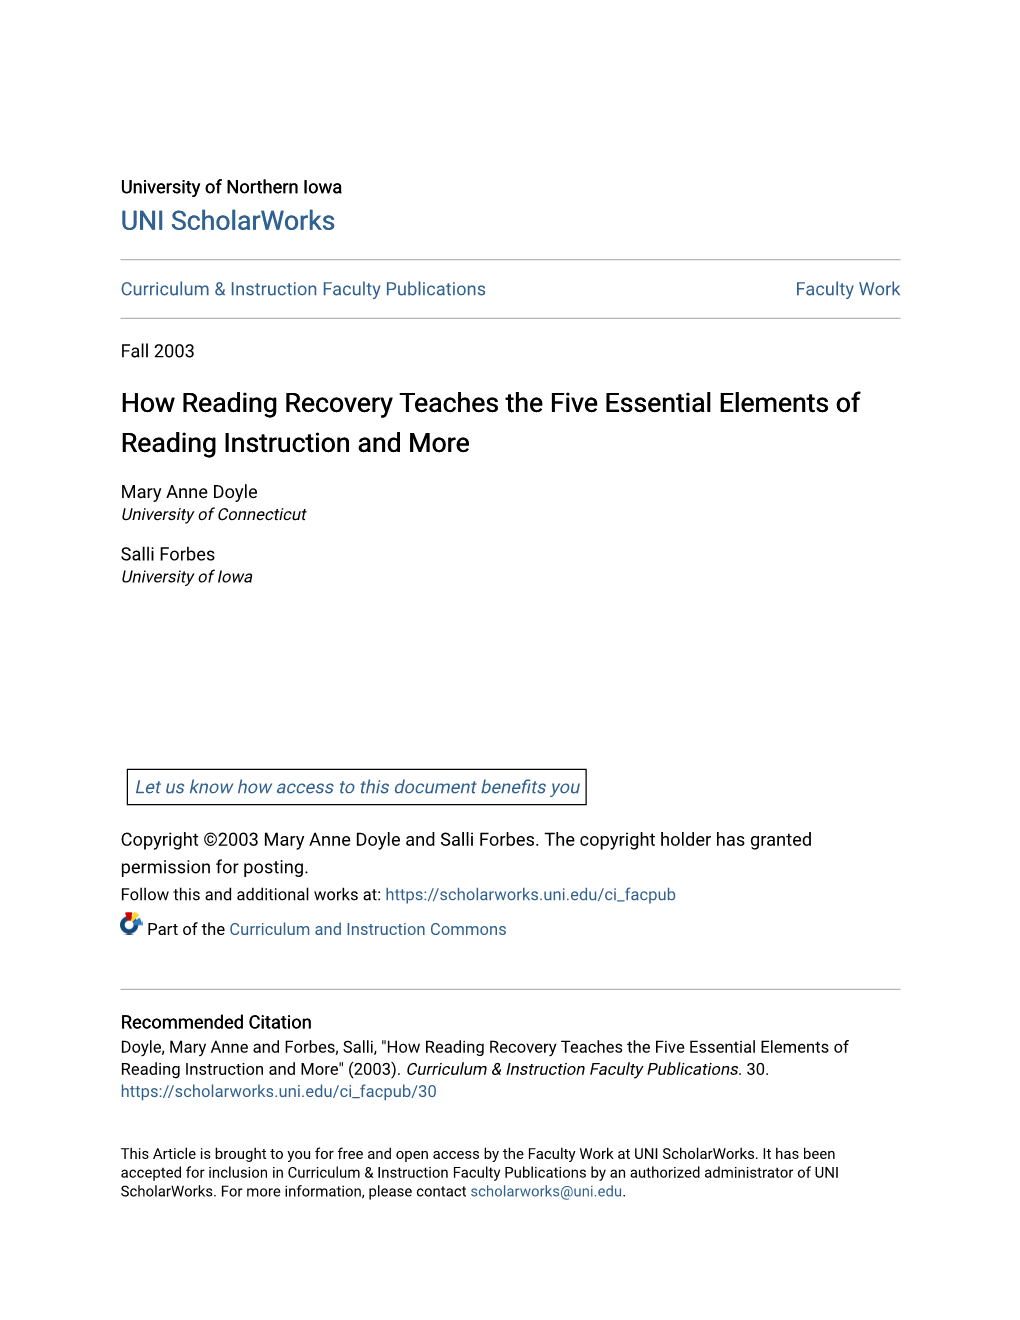 How Reading Recovery Teaches the Five Essential Elements of Reading Instruction and More